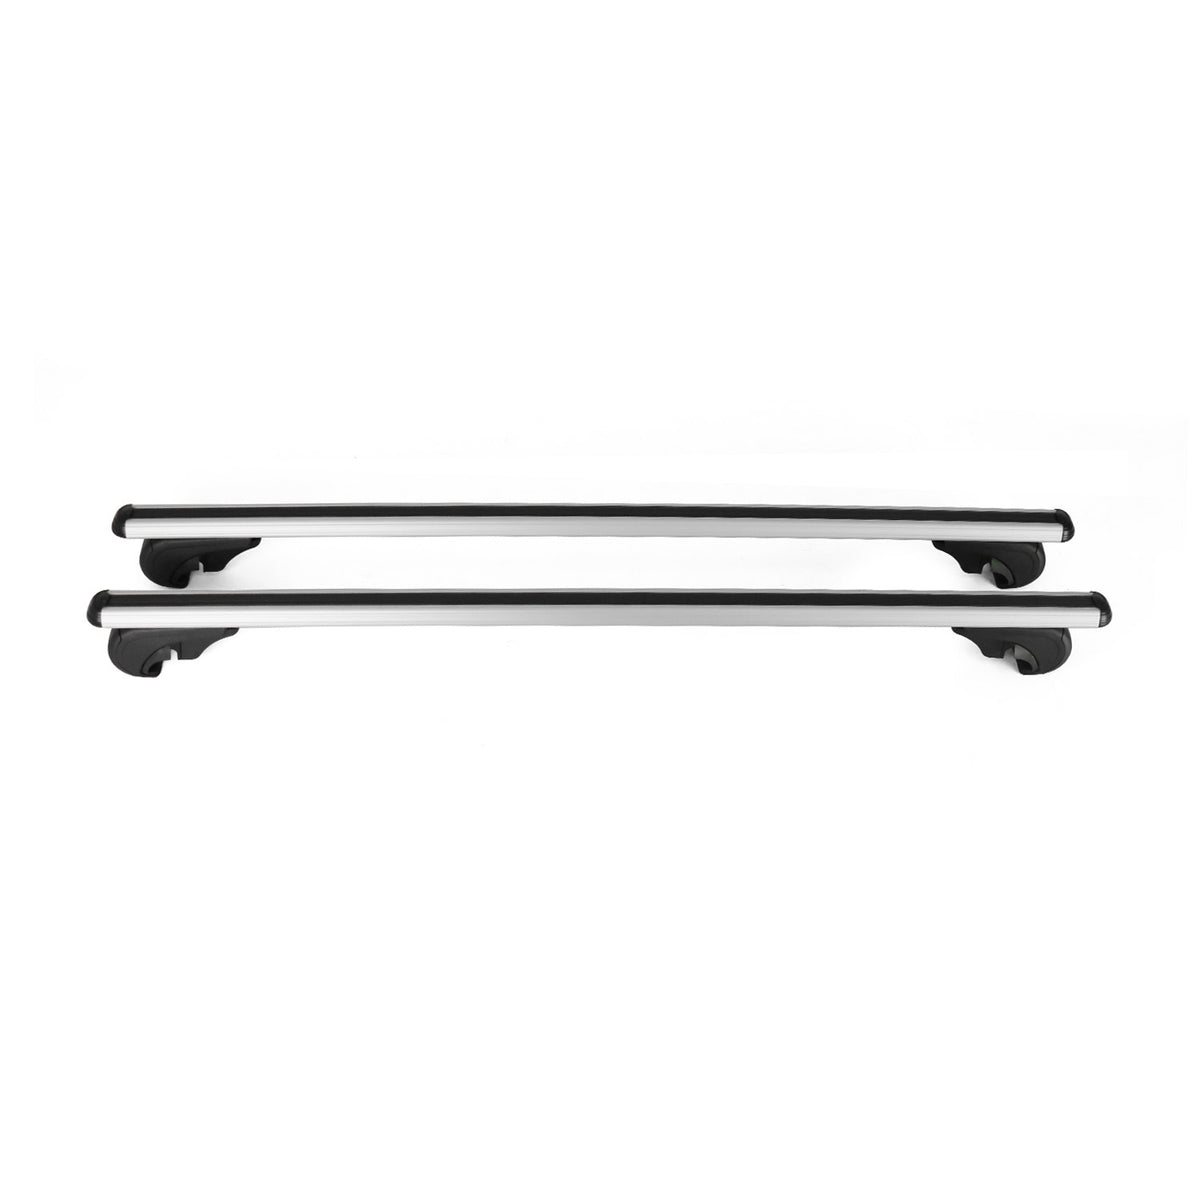 Roof rack for Mercedes Viano Vito W639 2003-2014 luggage rack base rack silver